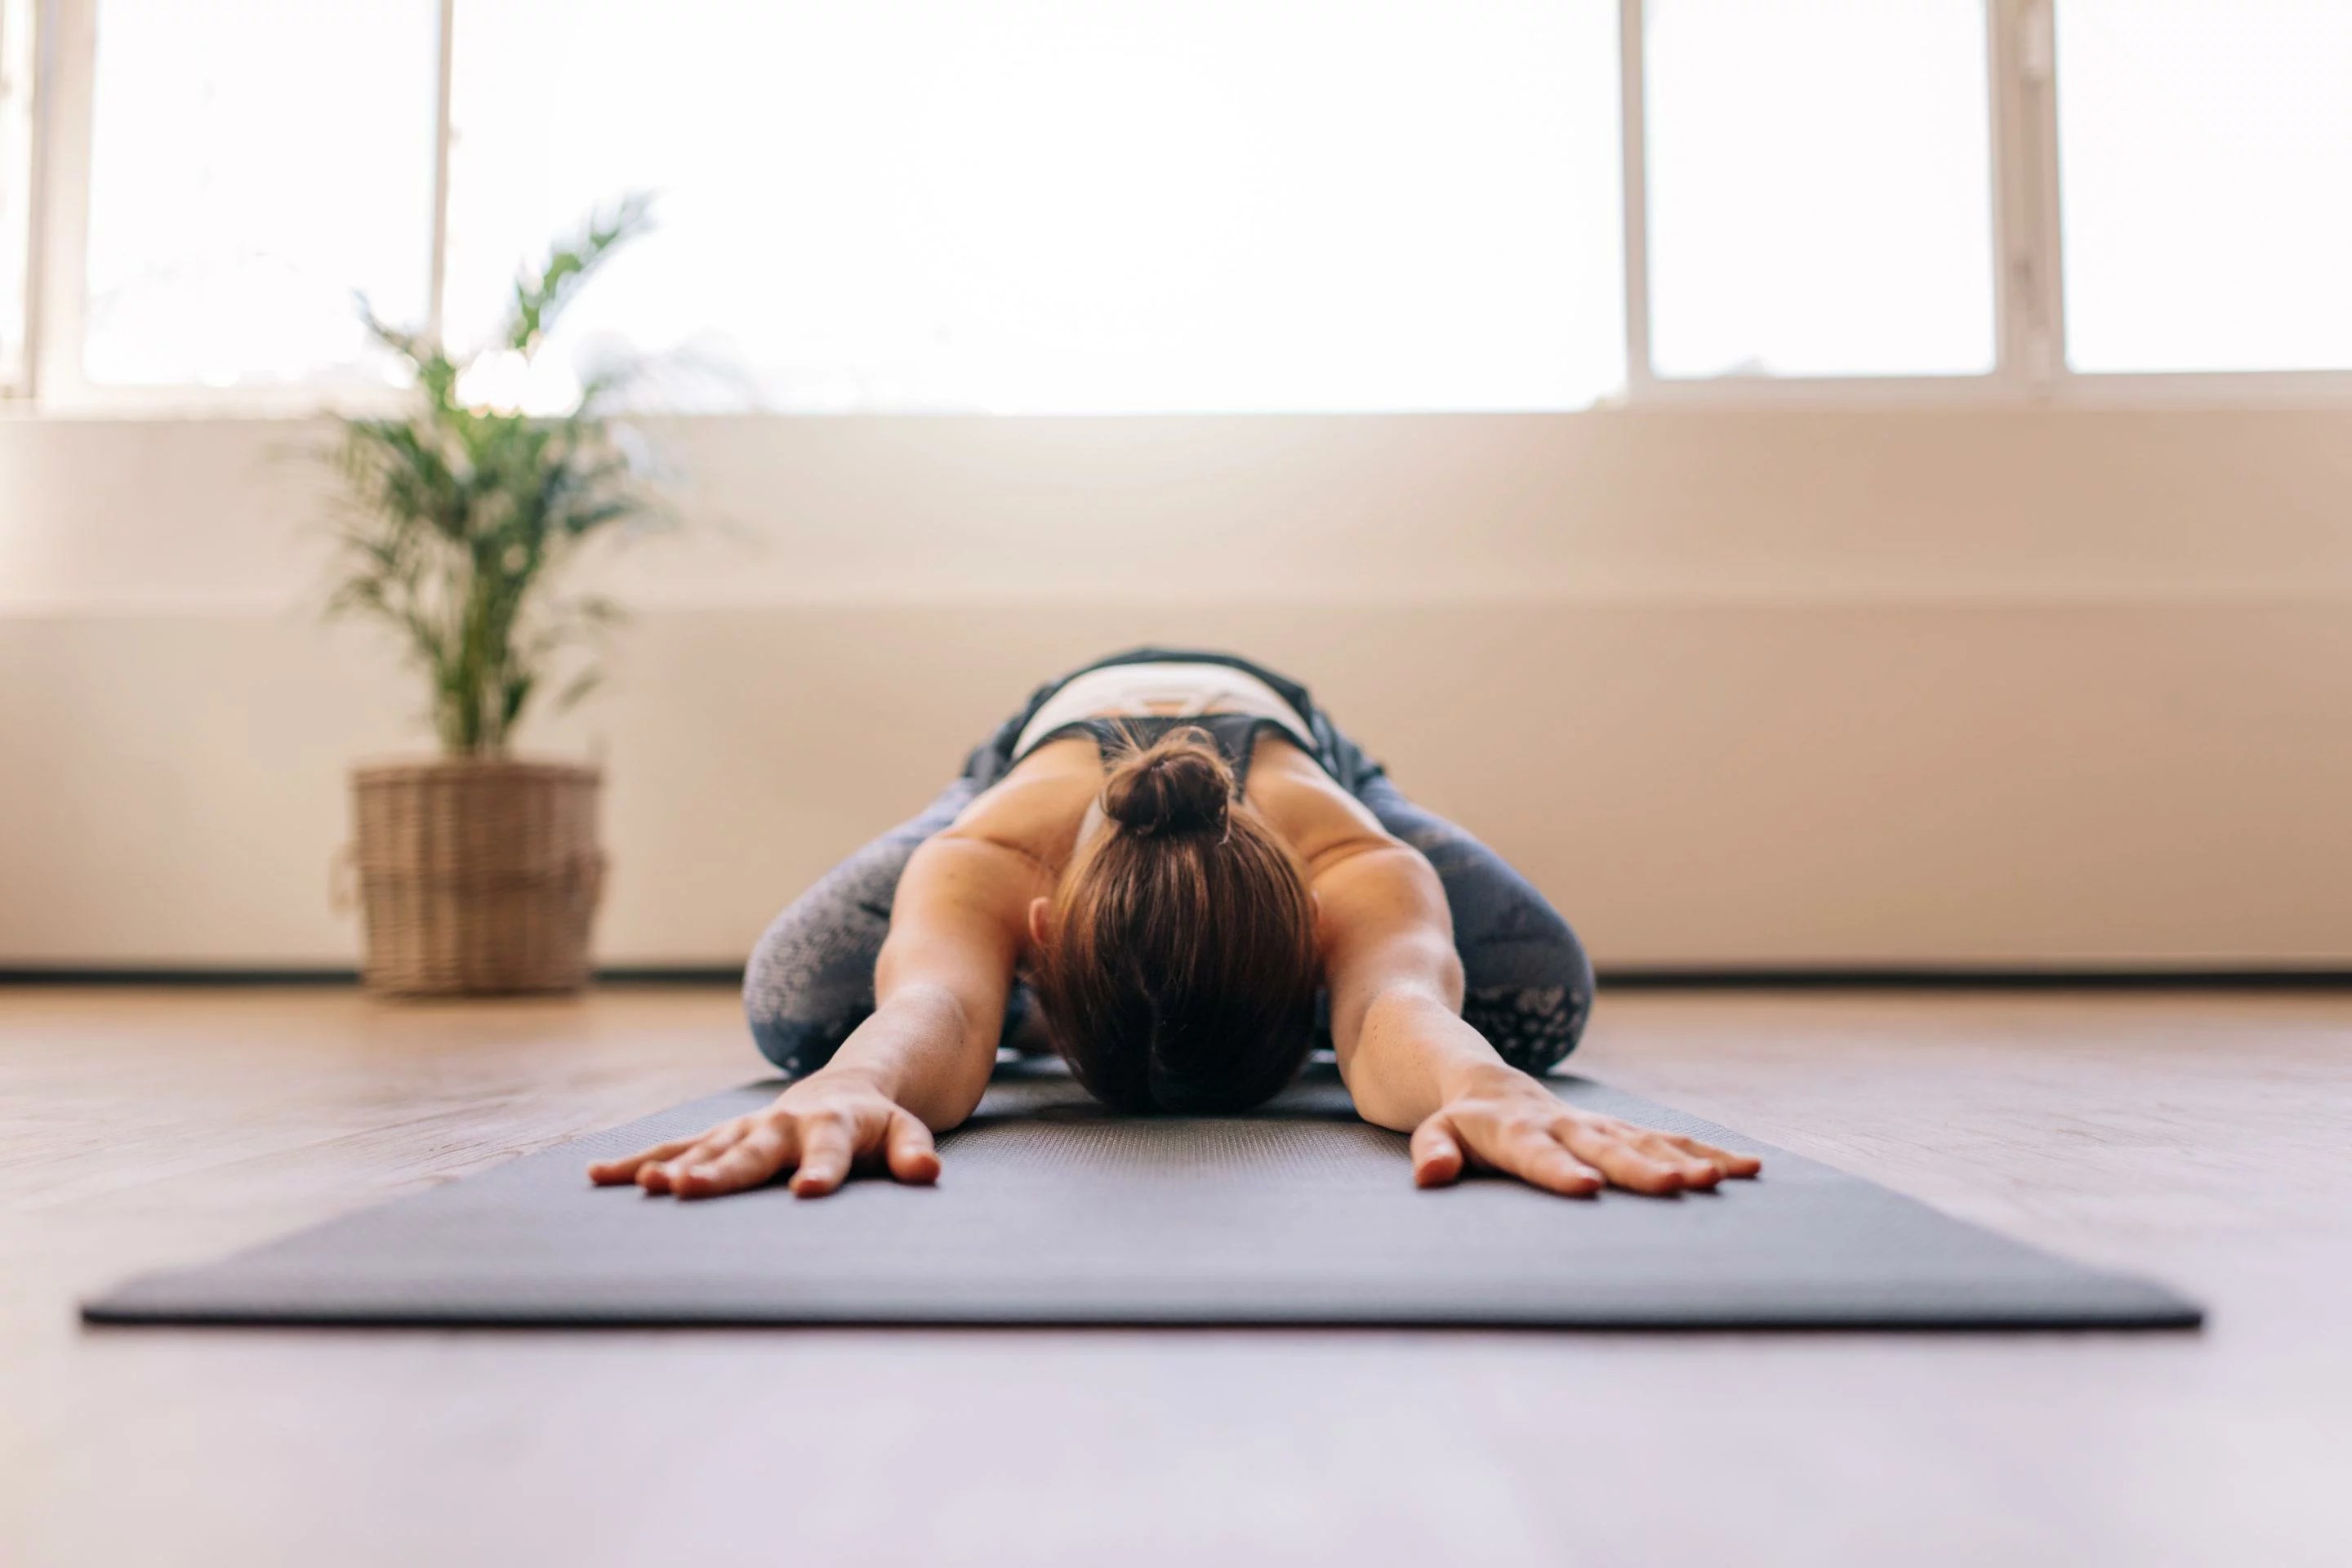 Yoga for Beginners: A Complete Guide to get Started - Is Yoga Right for You?